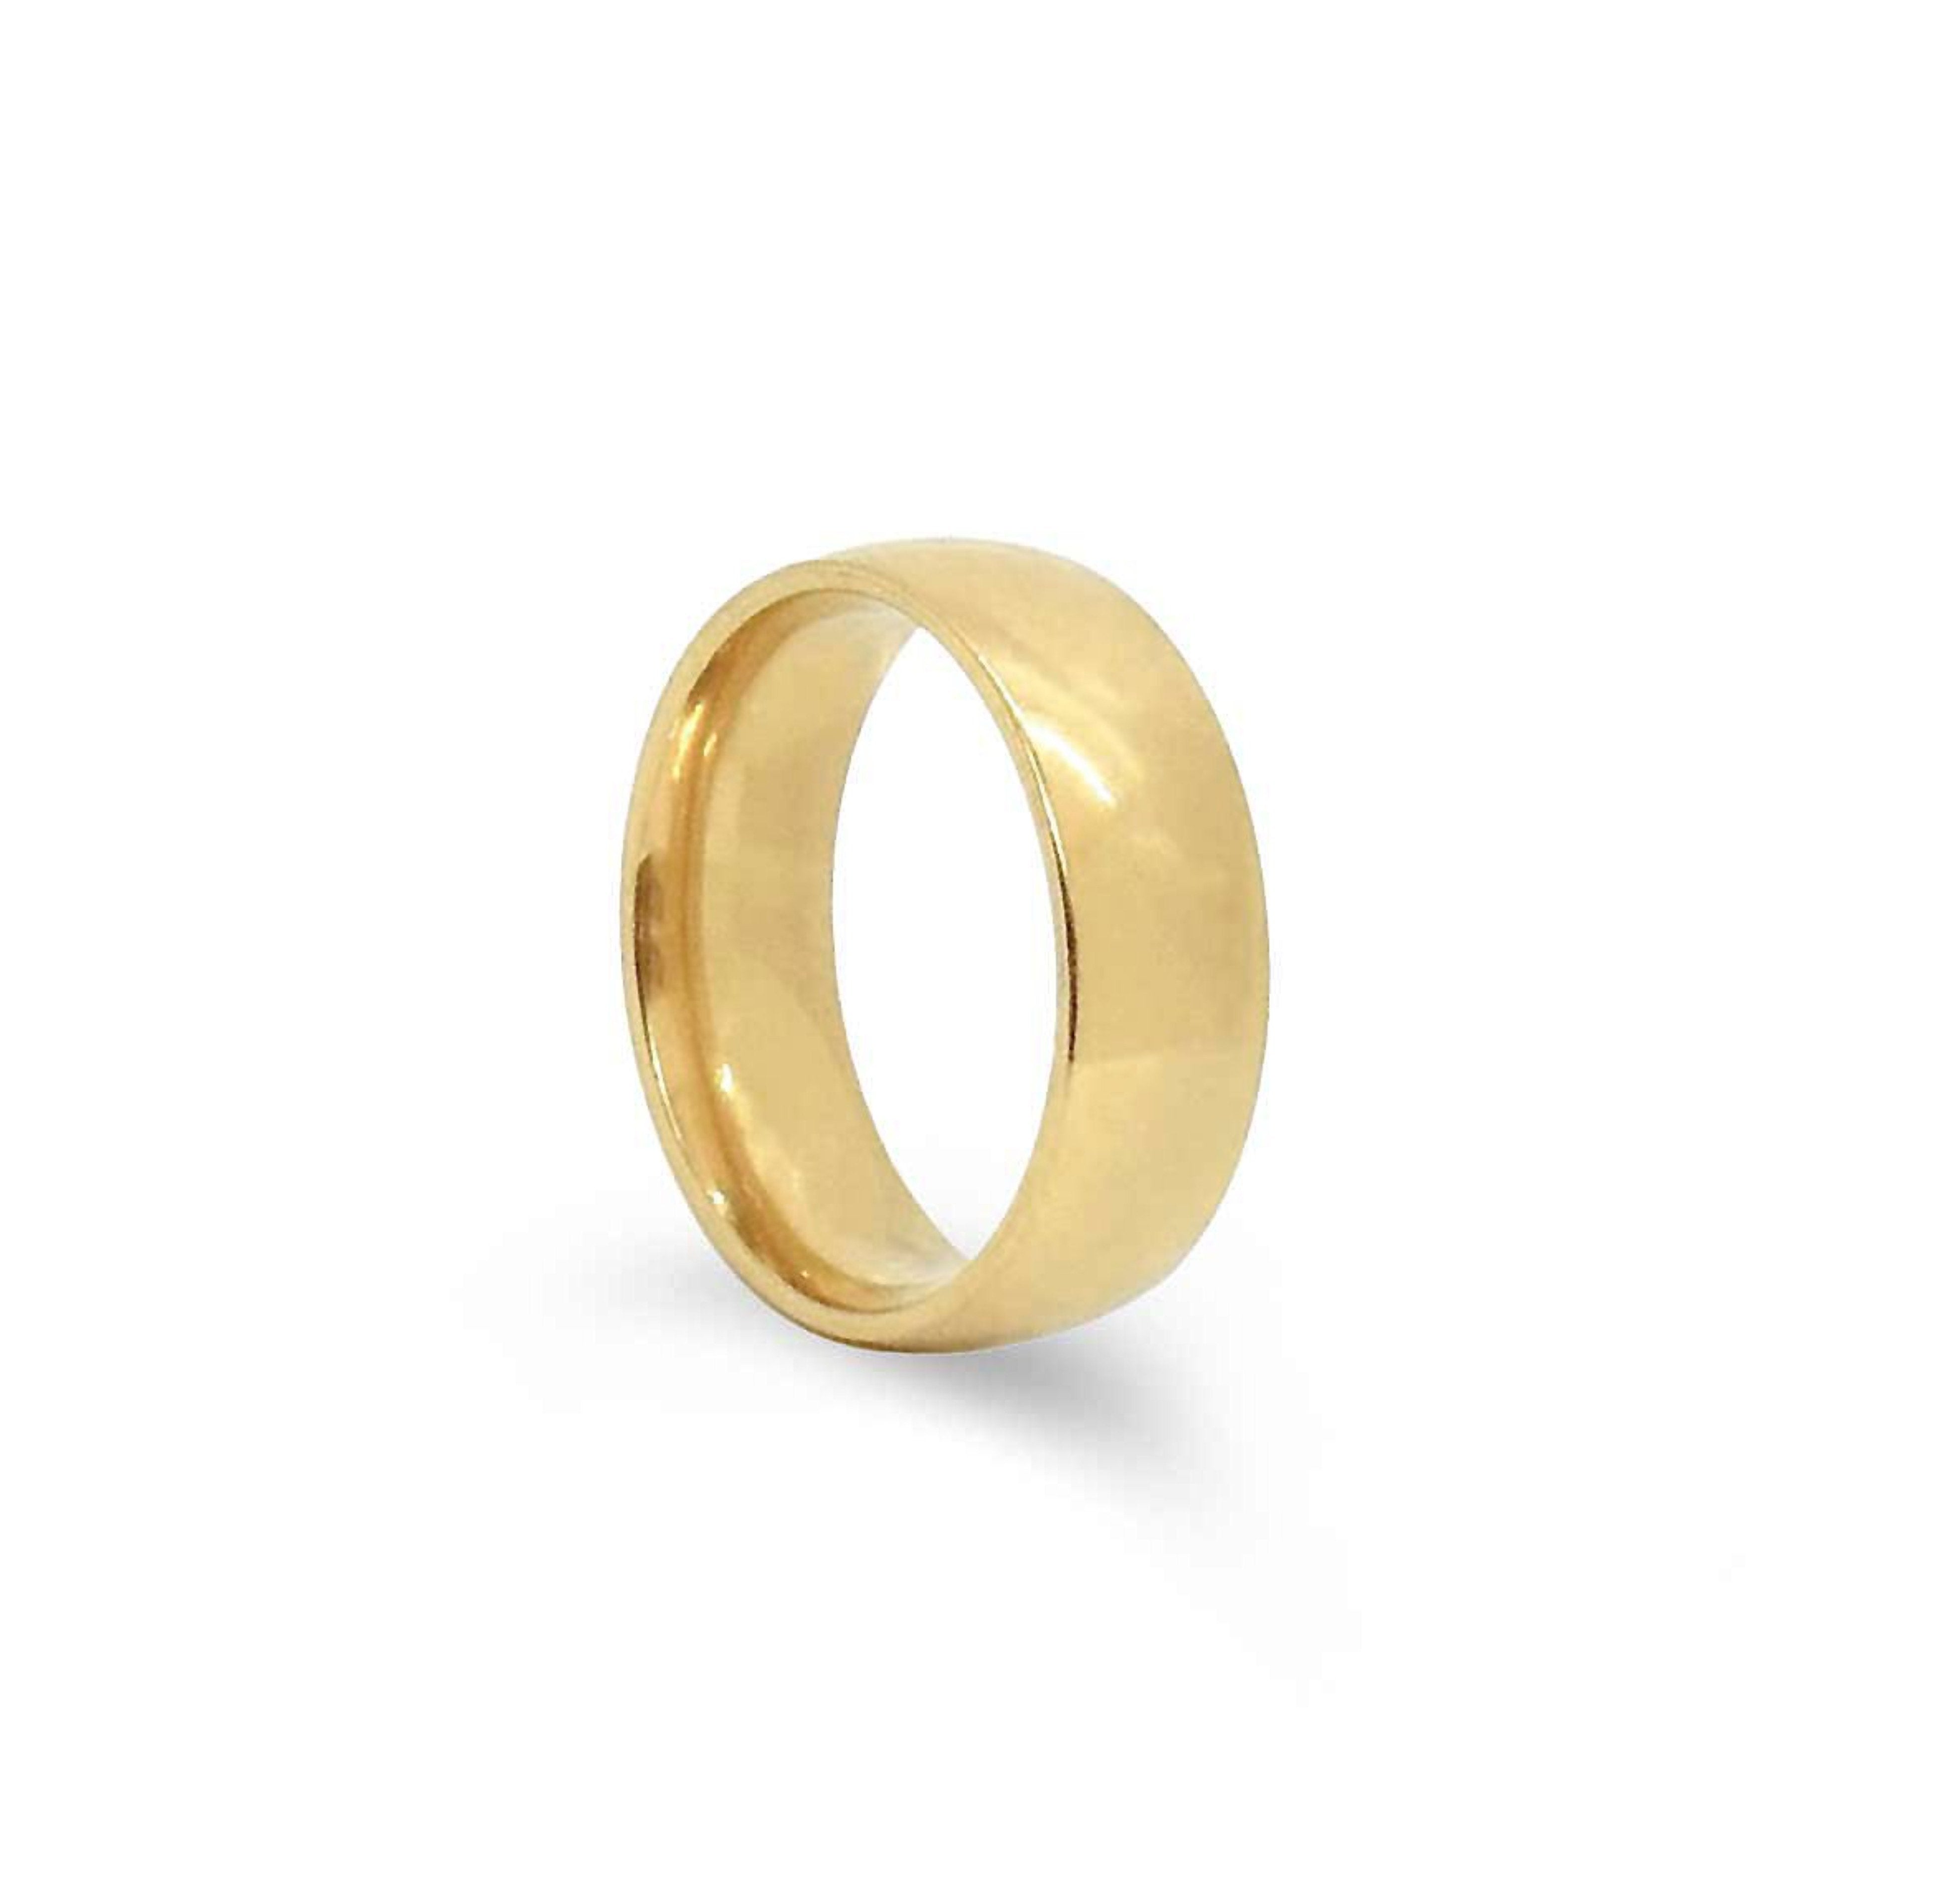 Thick gold ring band, waterproof jewelry 